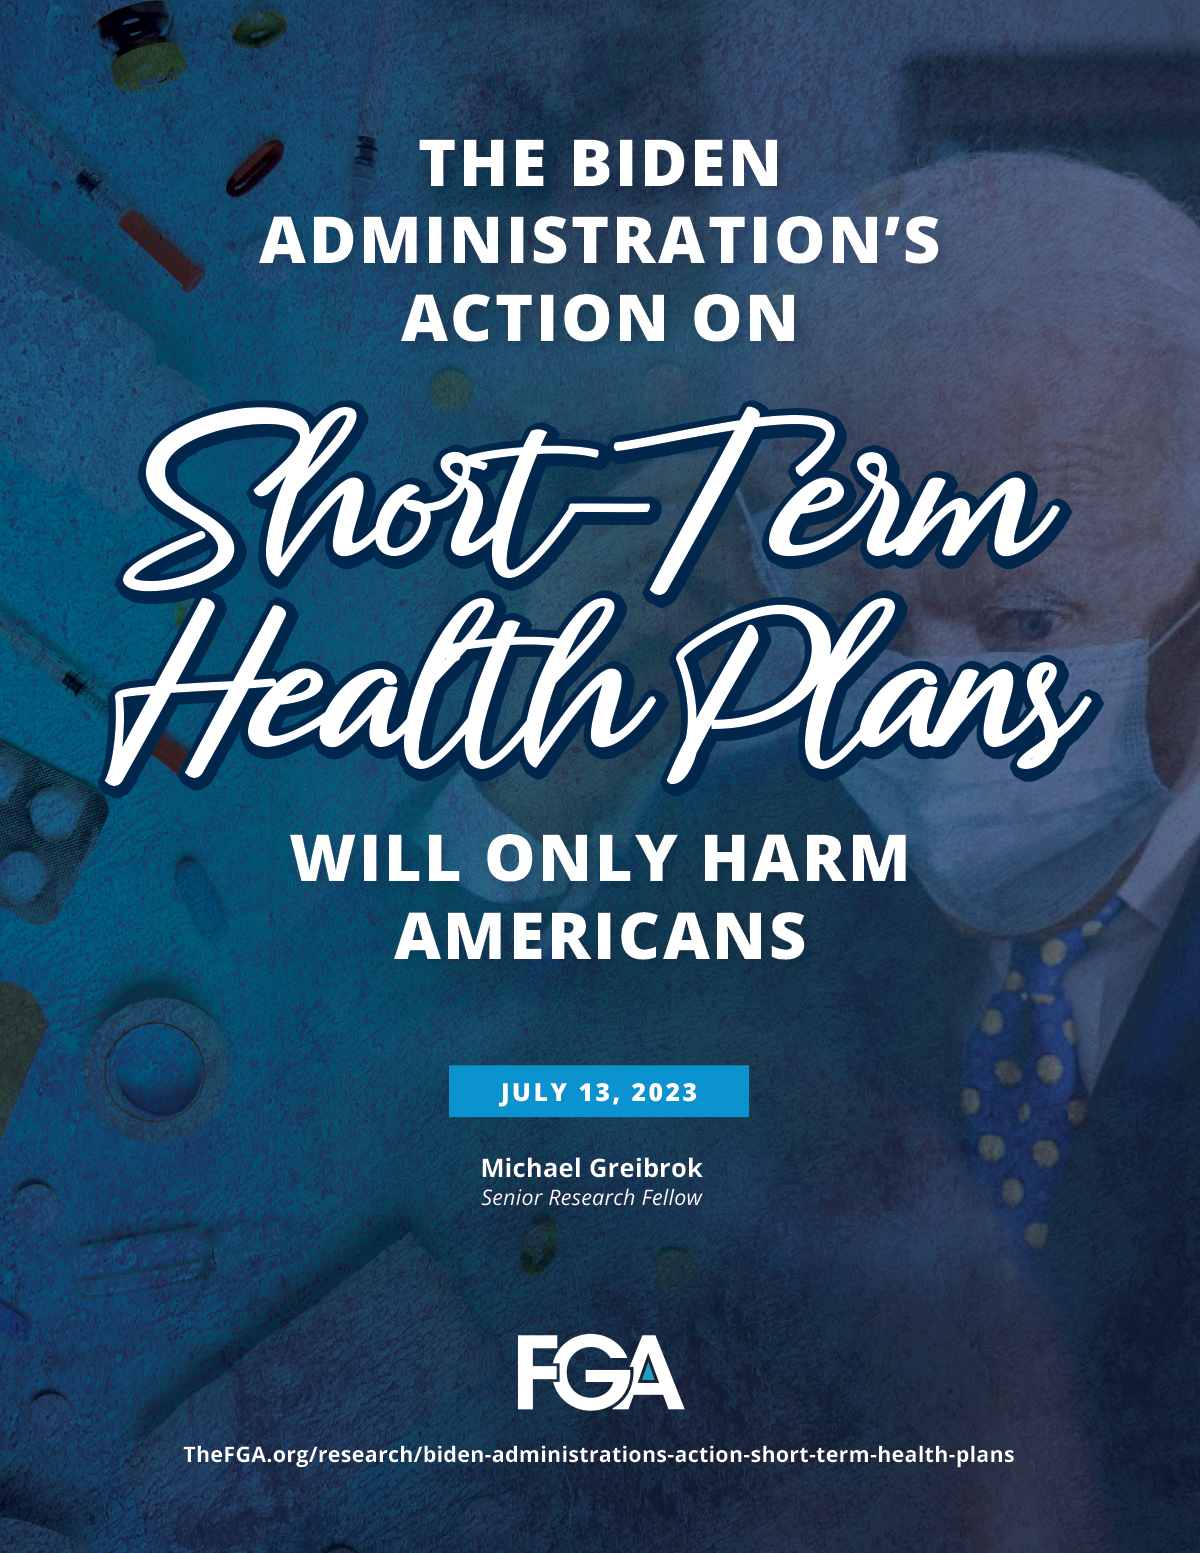 The Biden Administration’s Action on Short-Term Health Plans Will Only Harm Americans